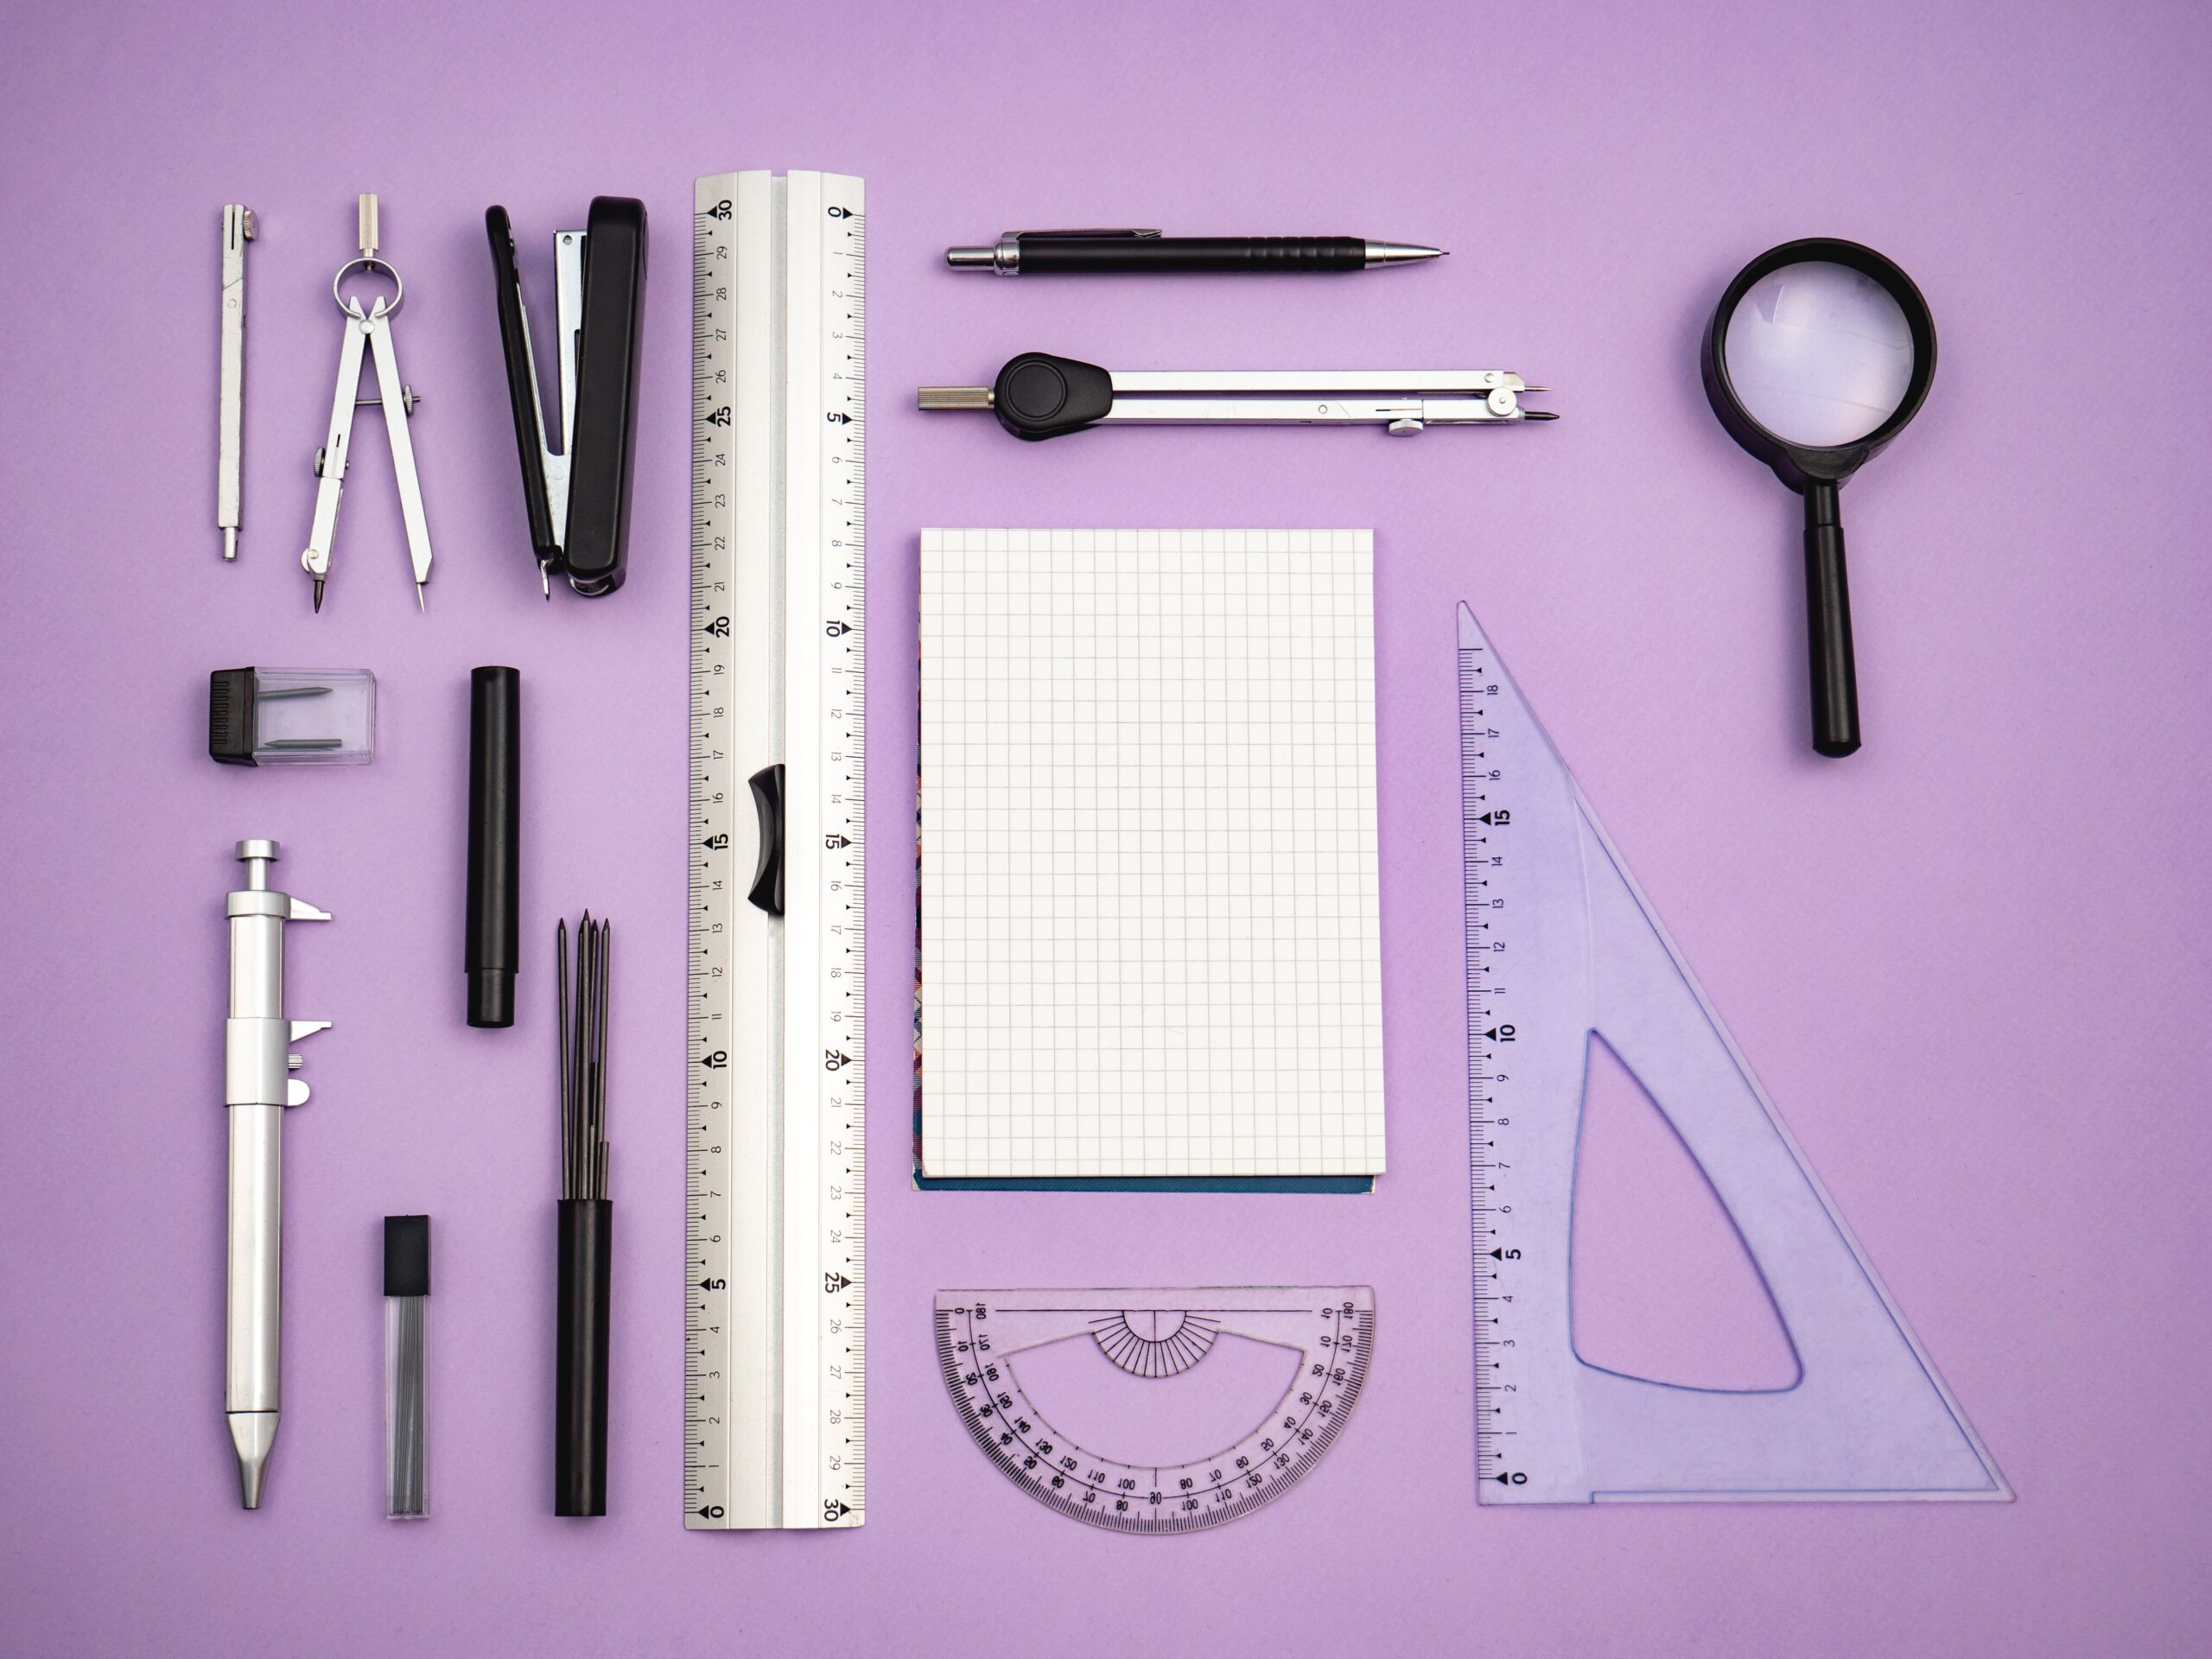 Various measuring tools with a purple background.